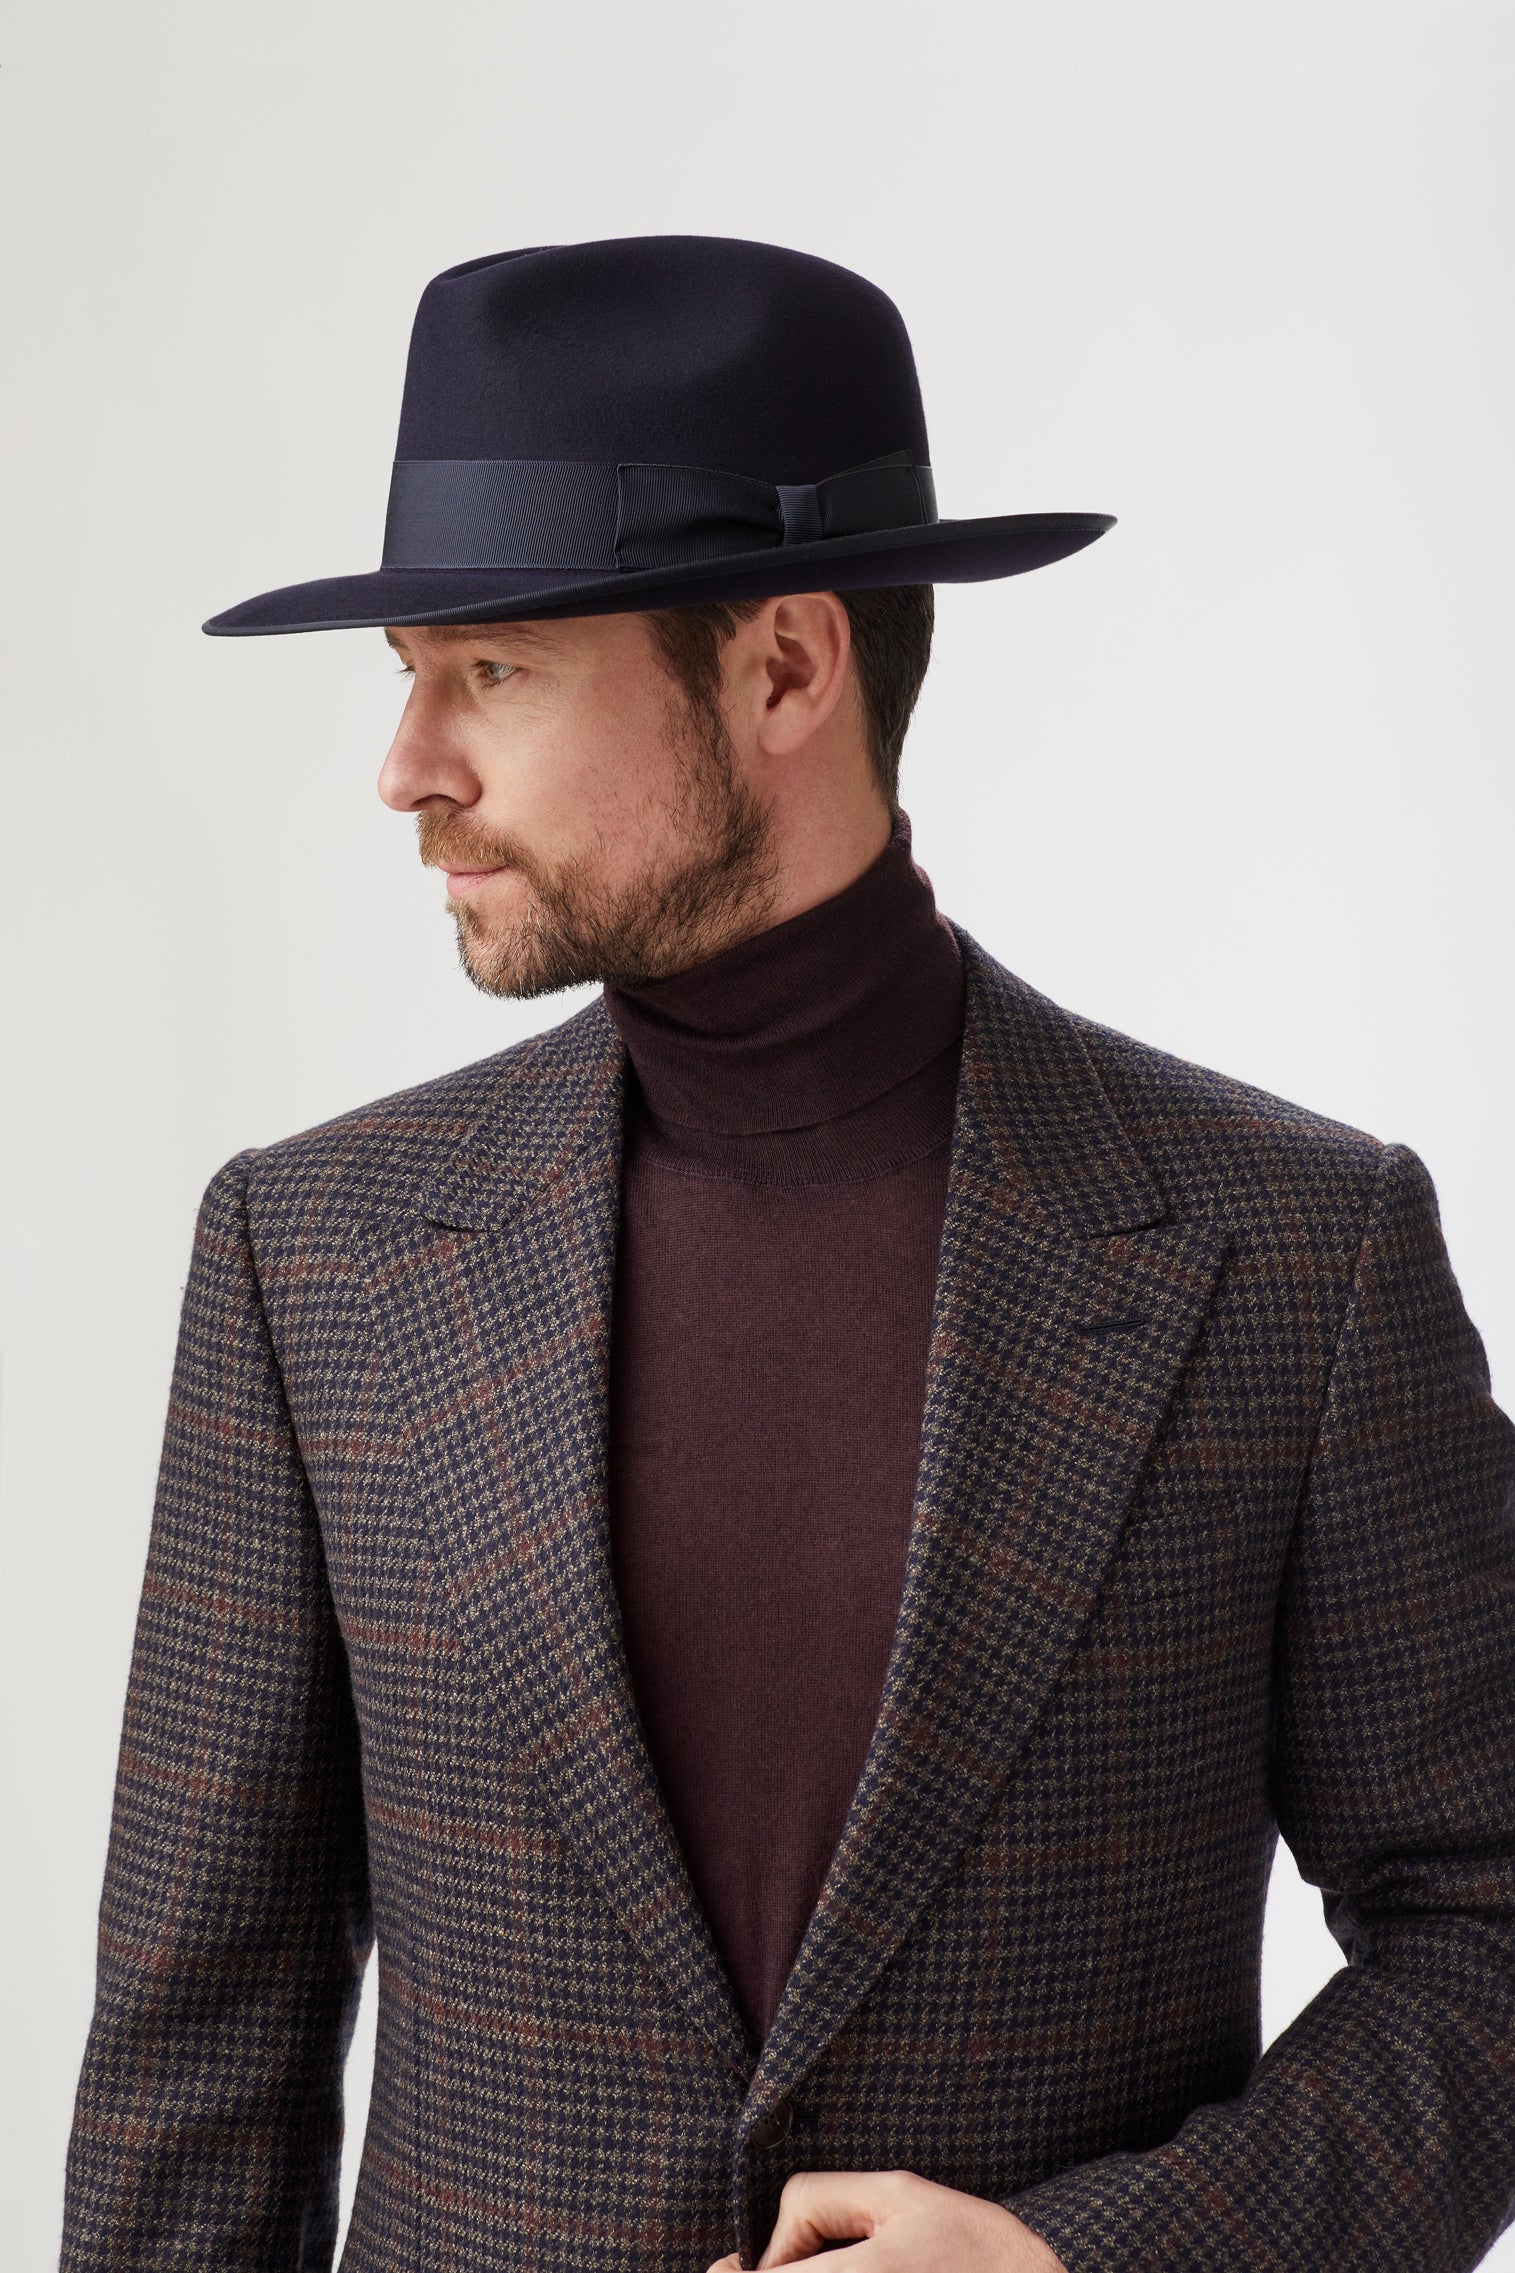 St James's Fedora - Hats for Heart-shaped Face Shapes - Lock & Co. Hatters London UK